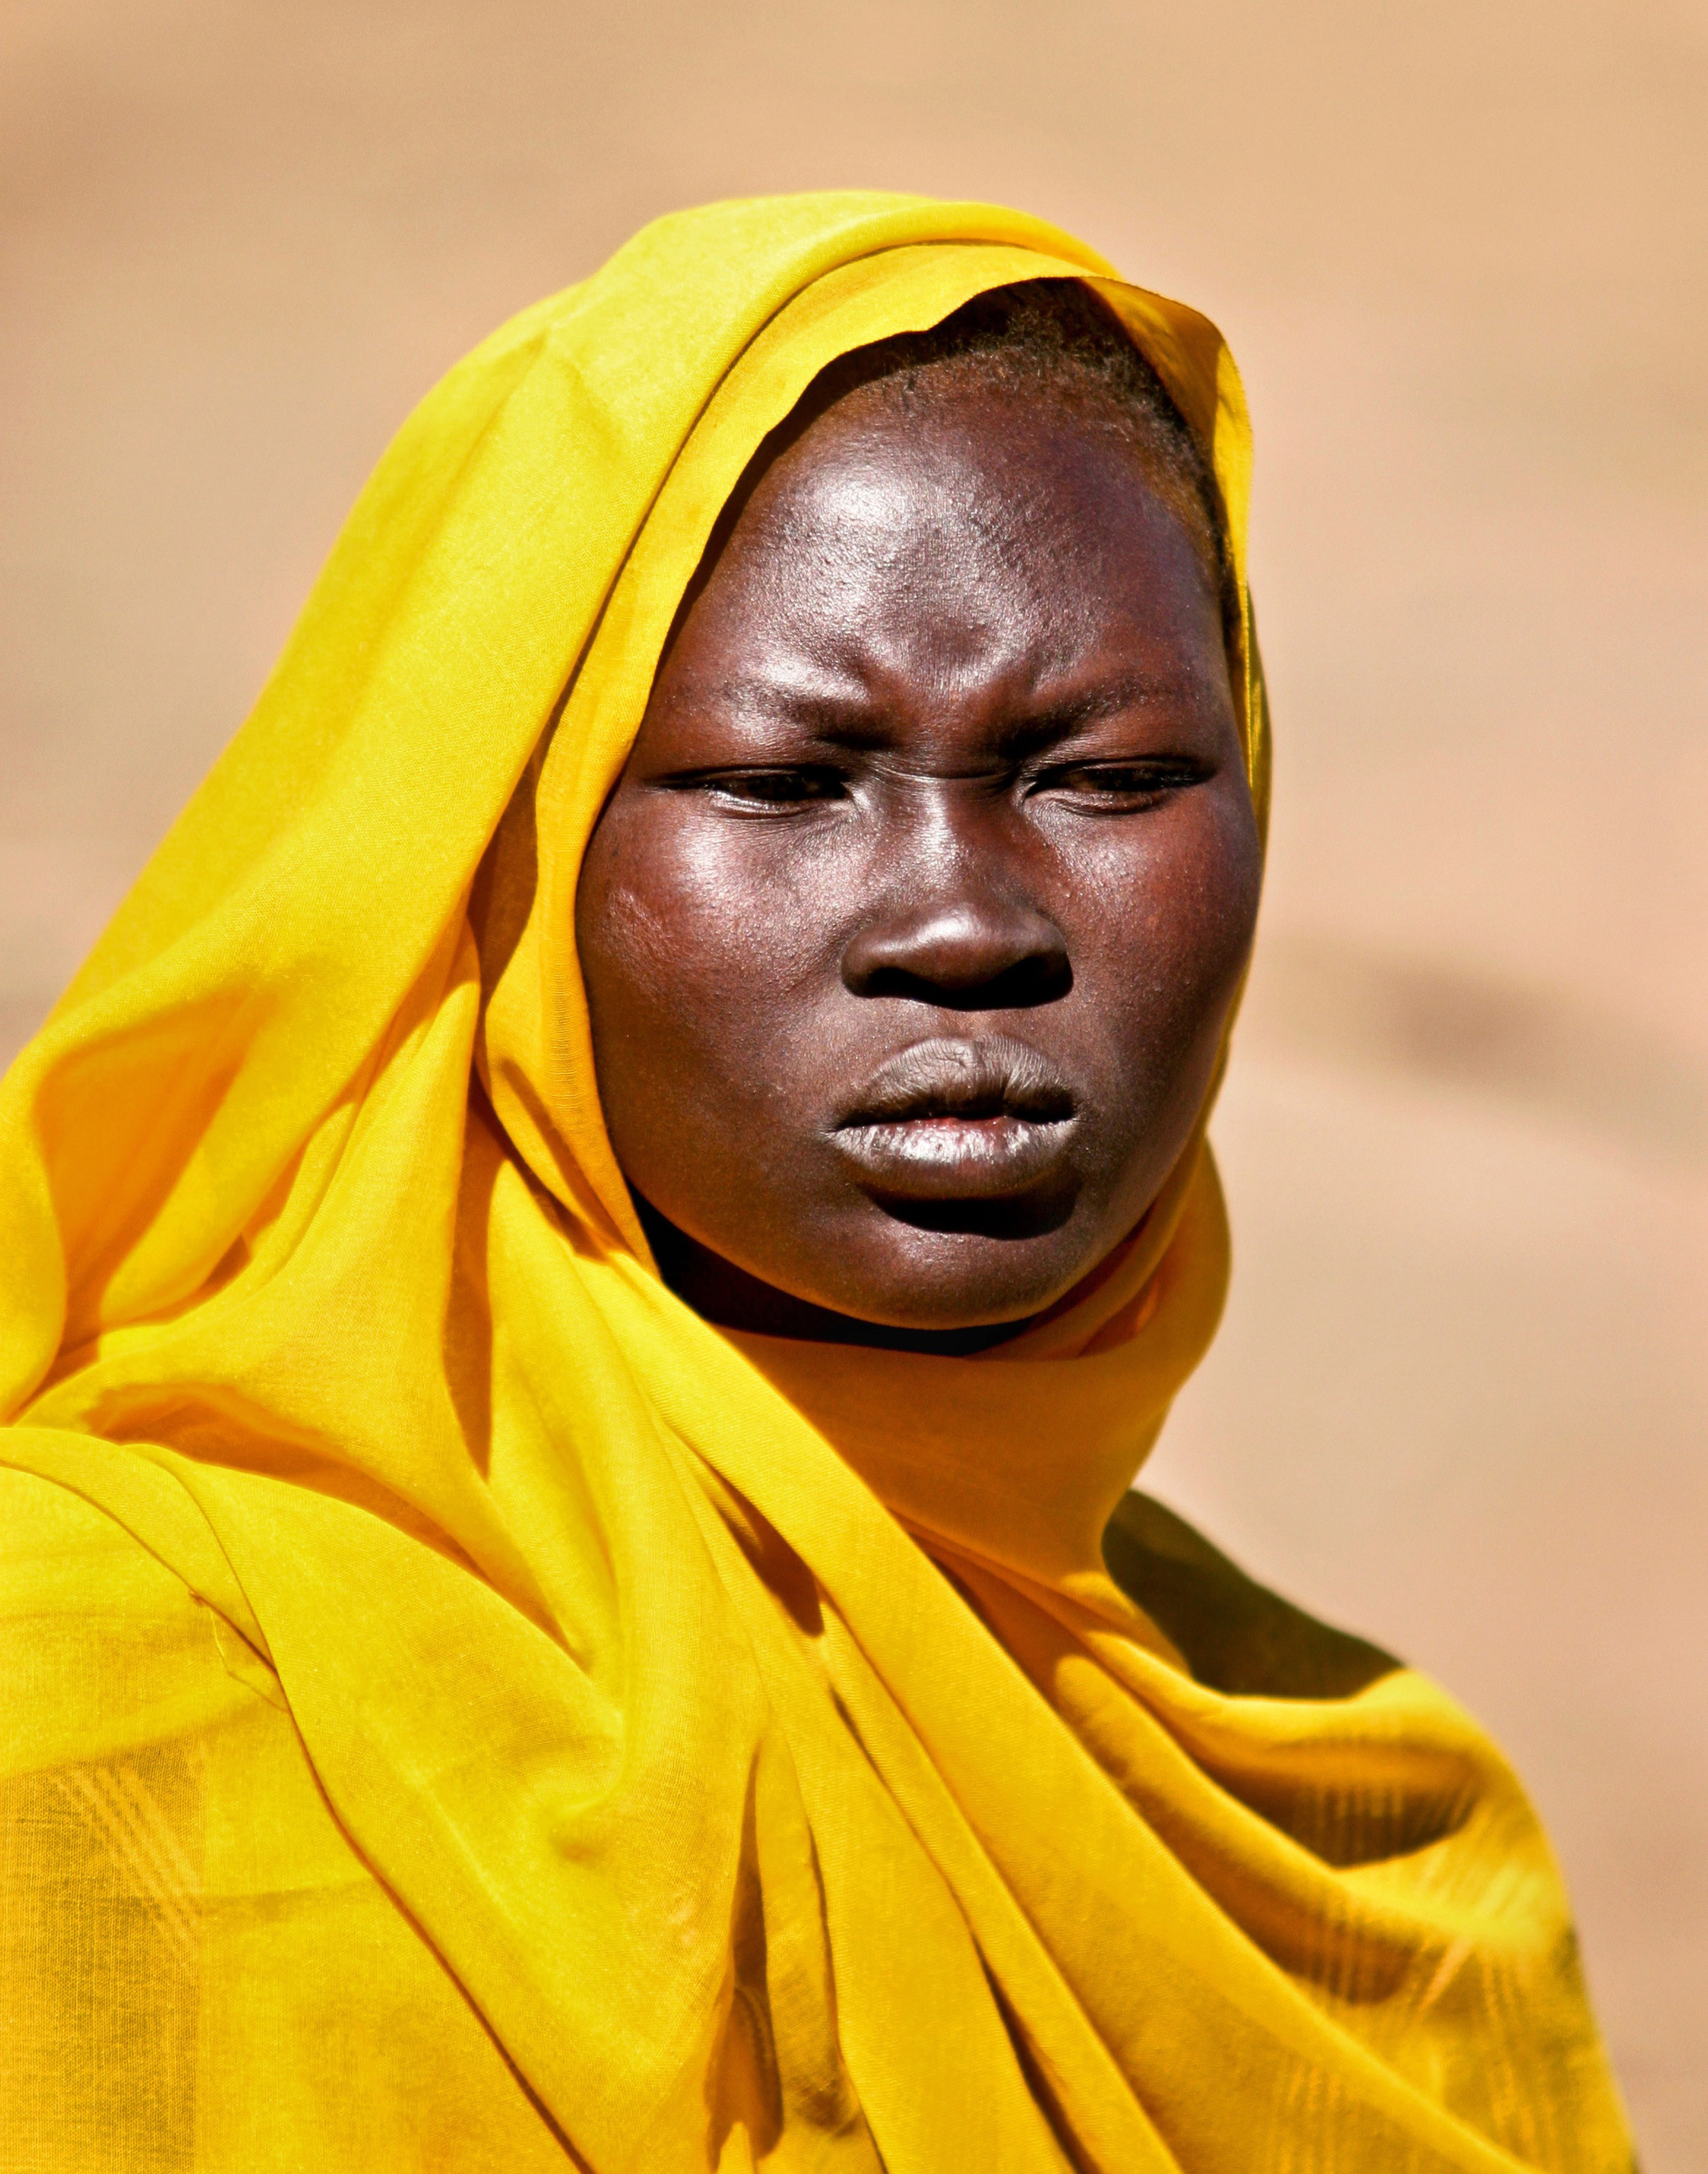  Woman in Sudan.  Photo courtesy Silent Images  